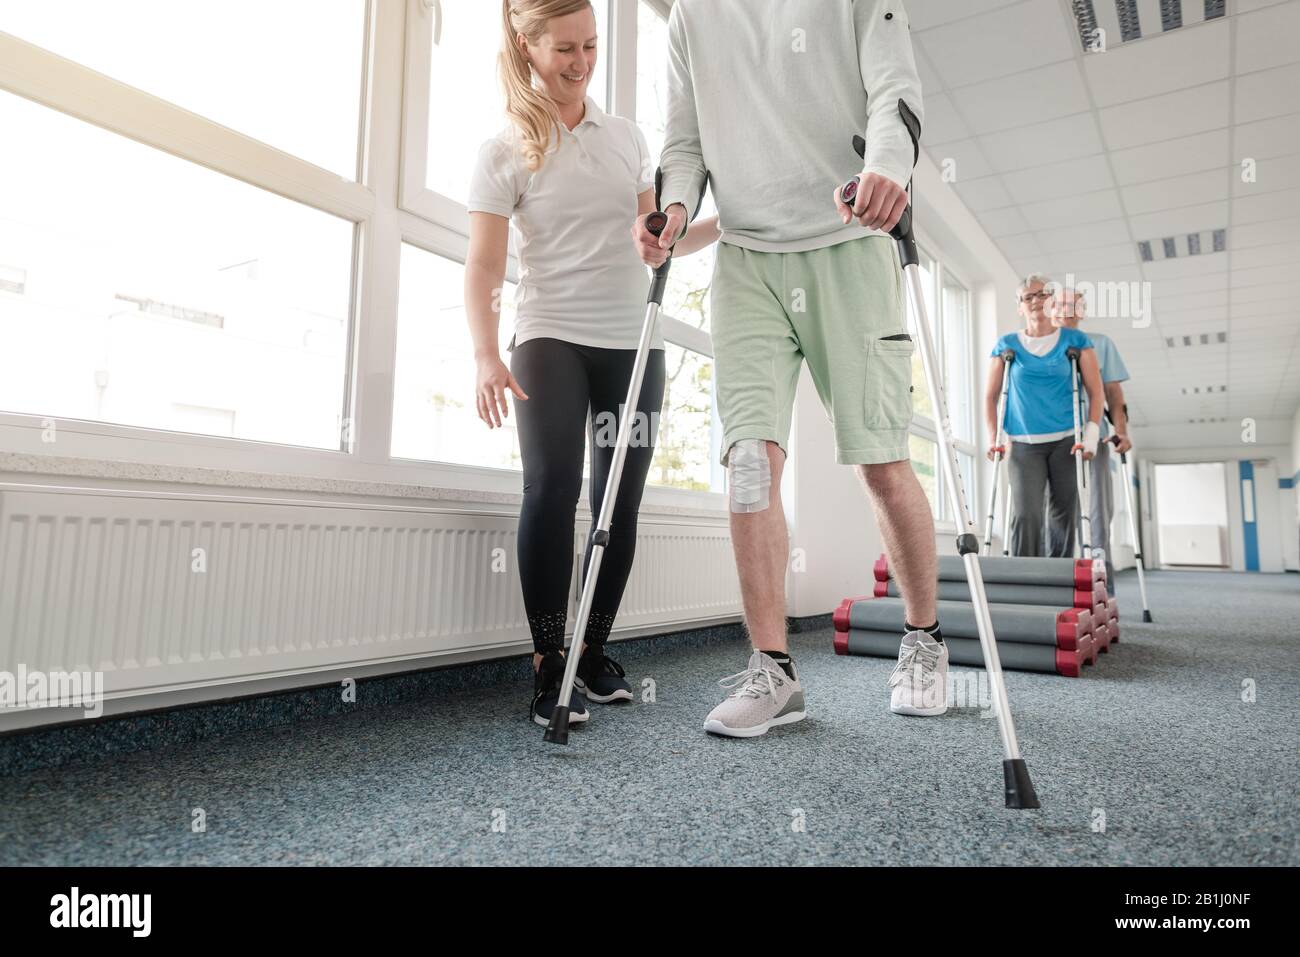 People in rehabilitation learning how to walk with crutches Stock Photo -  Alamy